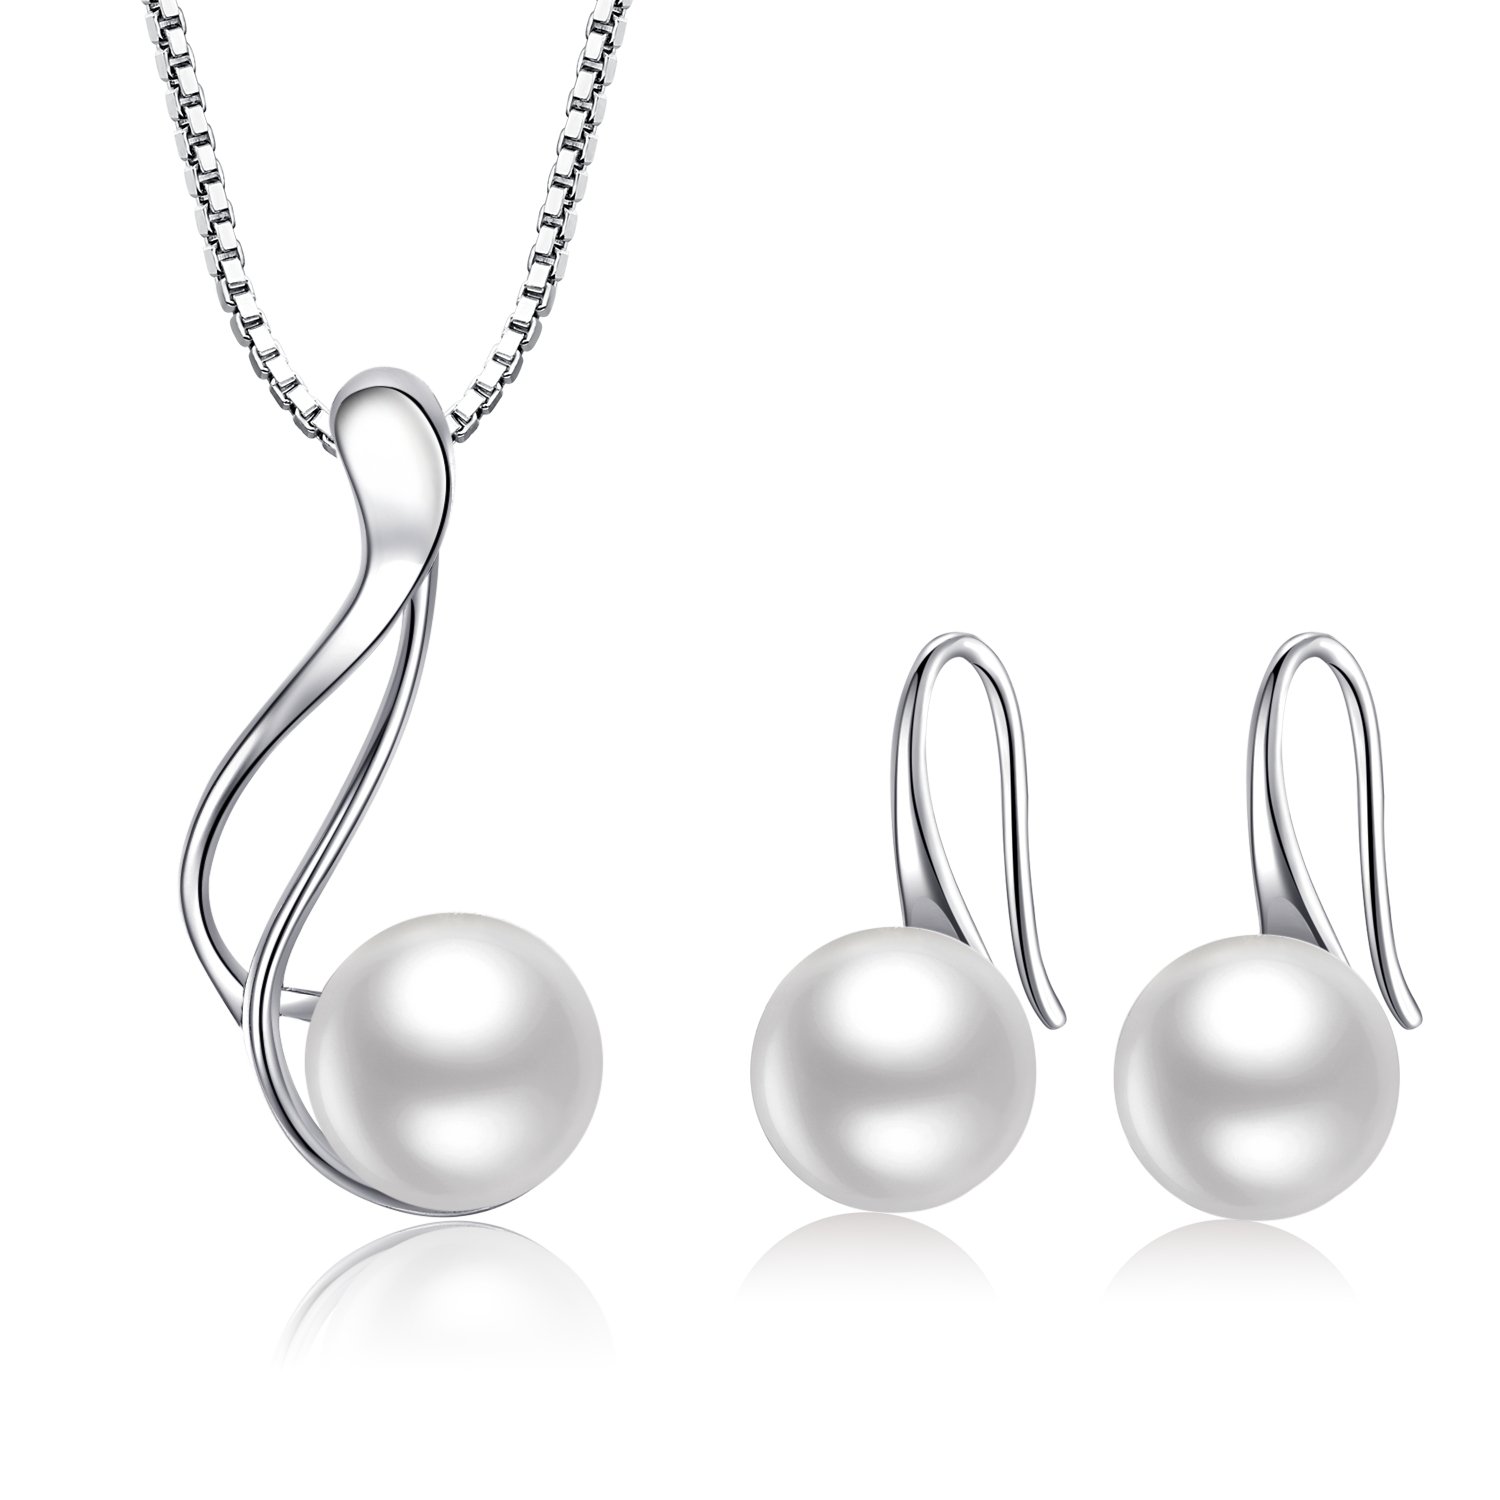 OneSight Sterling Silver Freshwater Cultured Pearl Jewelry Necklace Earrings Set For Women (White Pearl Or Dark Blue Pearl)